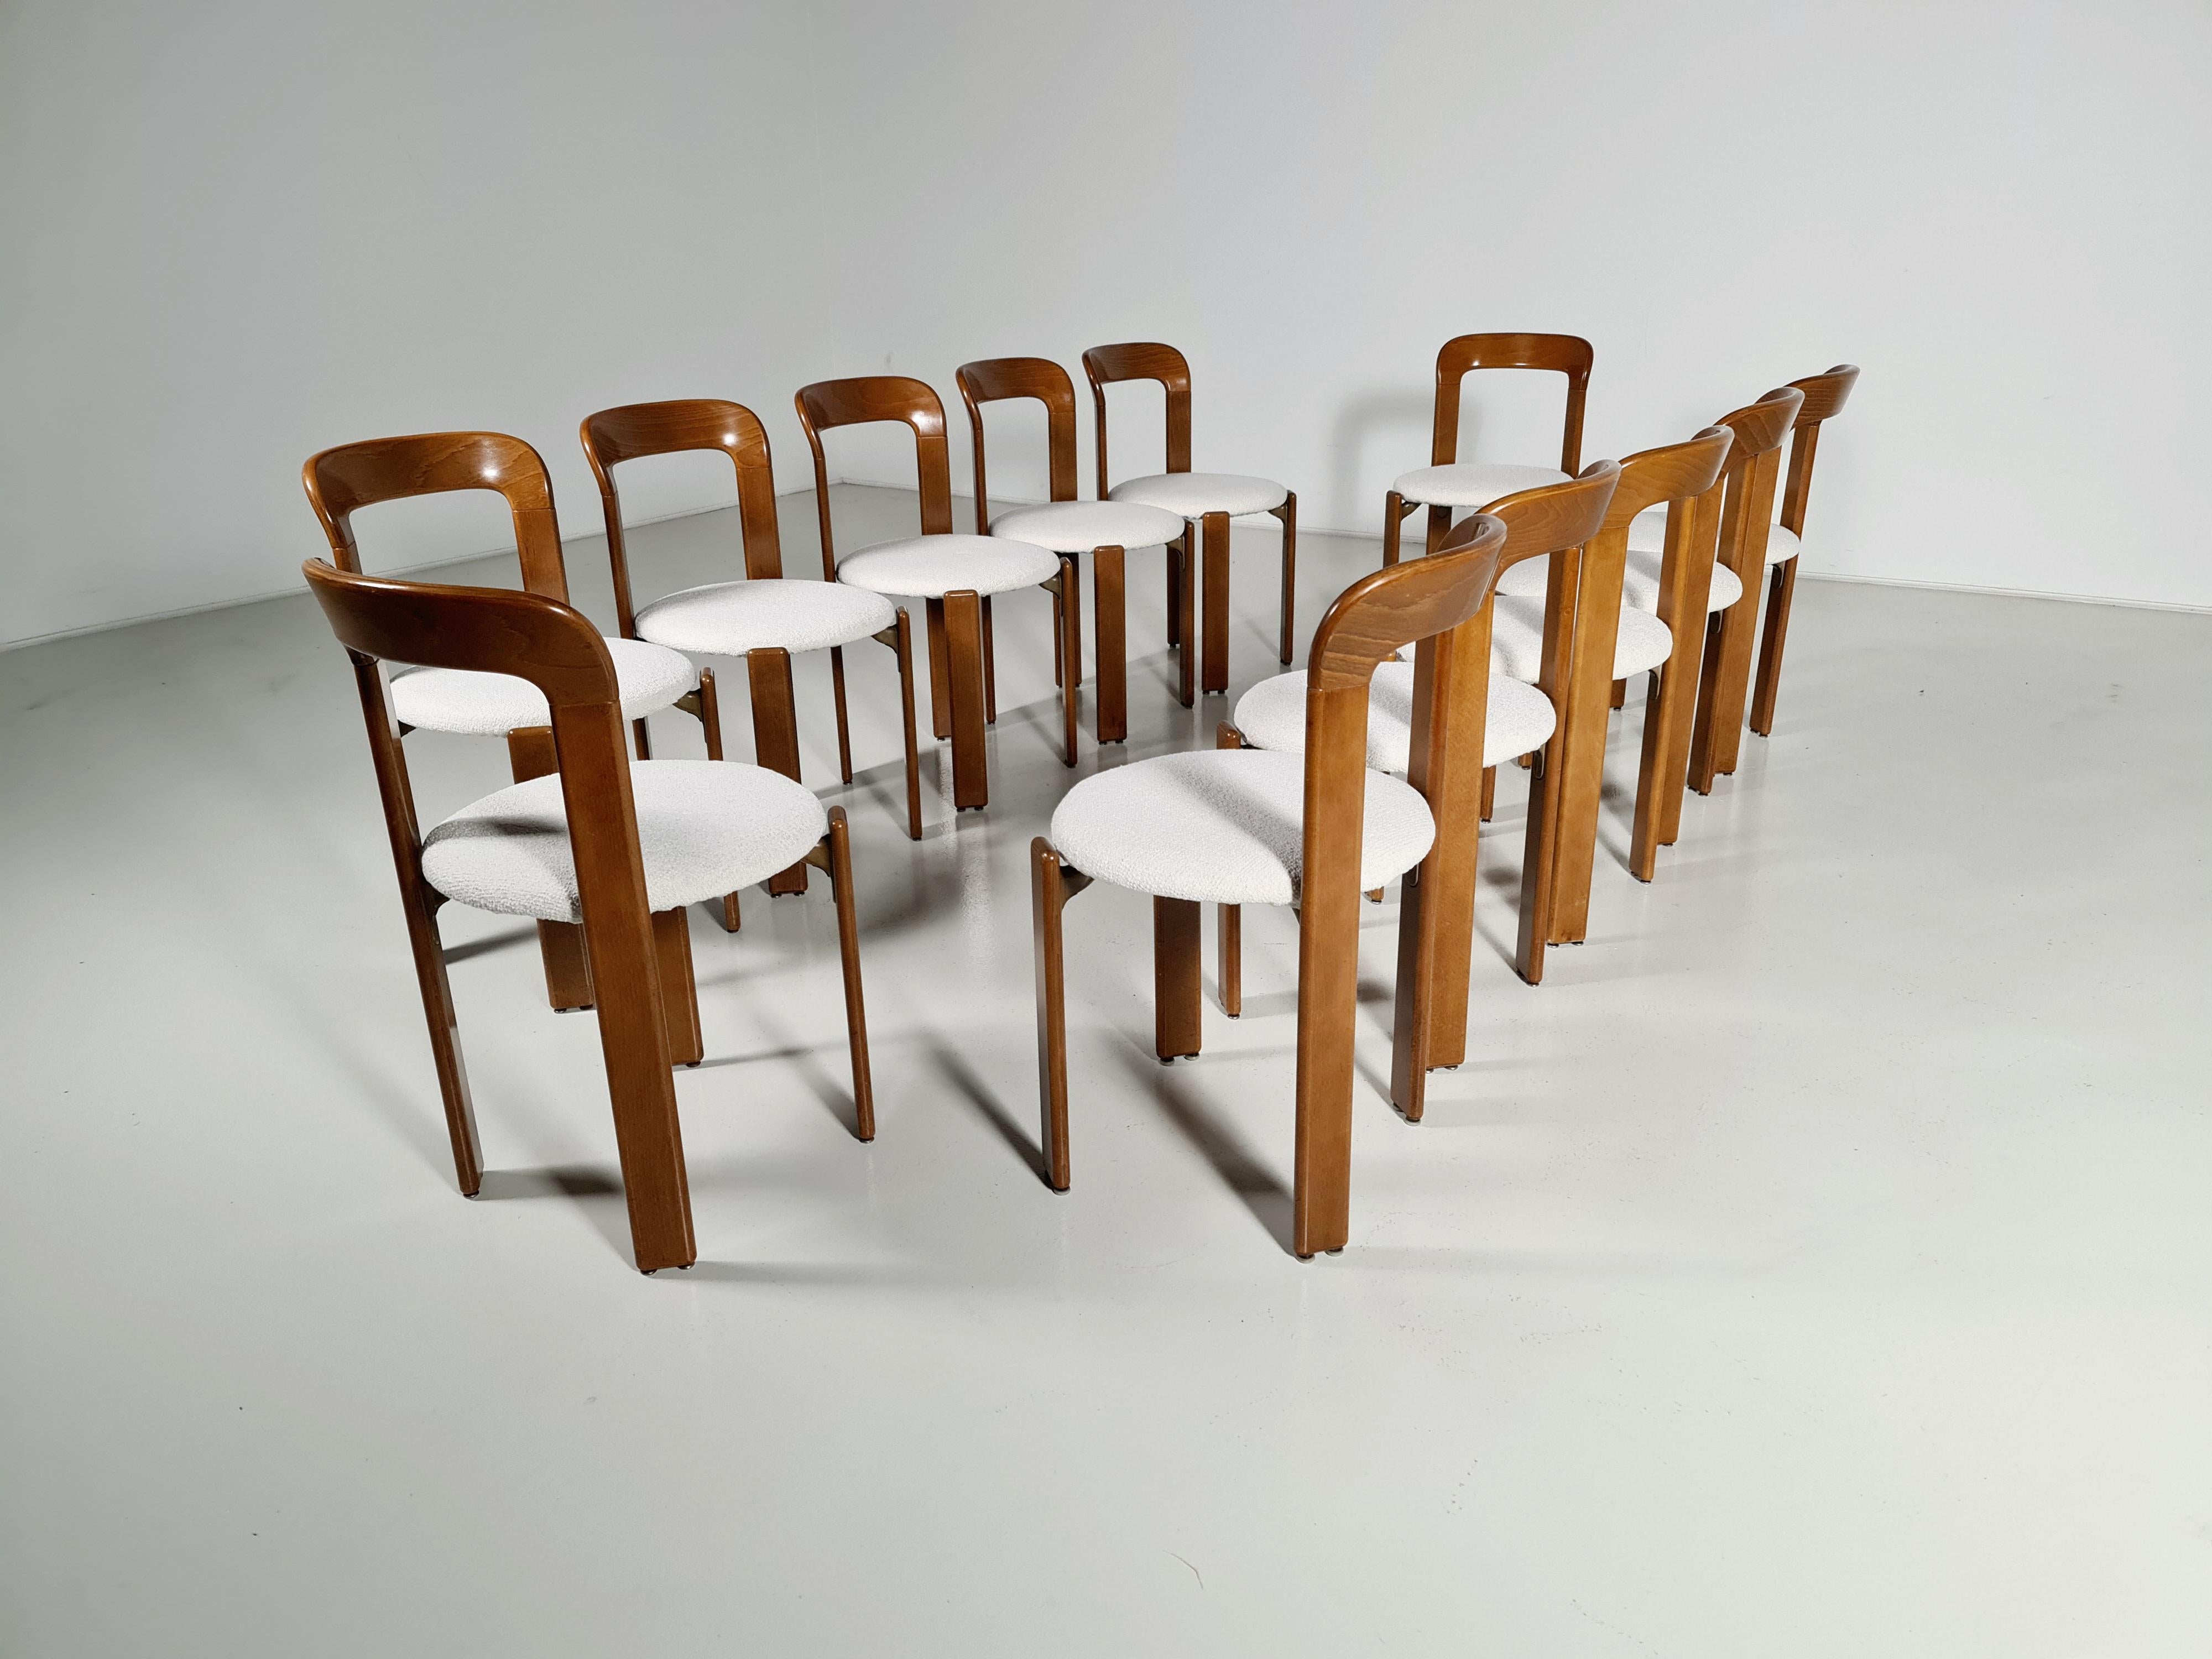 Set of 12 Bruno Rey vintage dining chairs, Switzerland, 1970. Made of beechwood and reupholstered in a boucle fabric.

Referred to as 